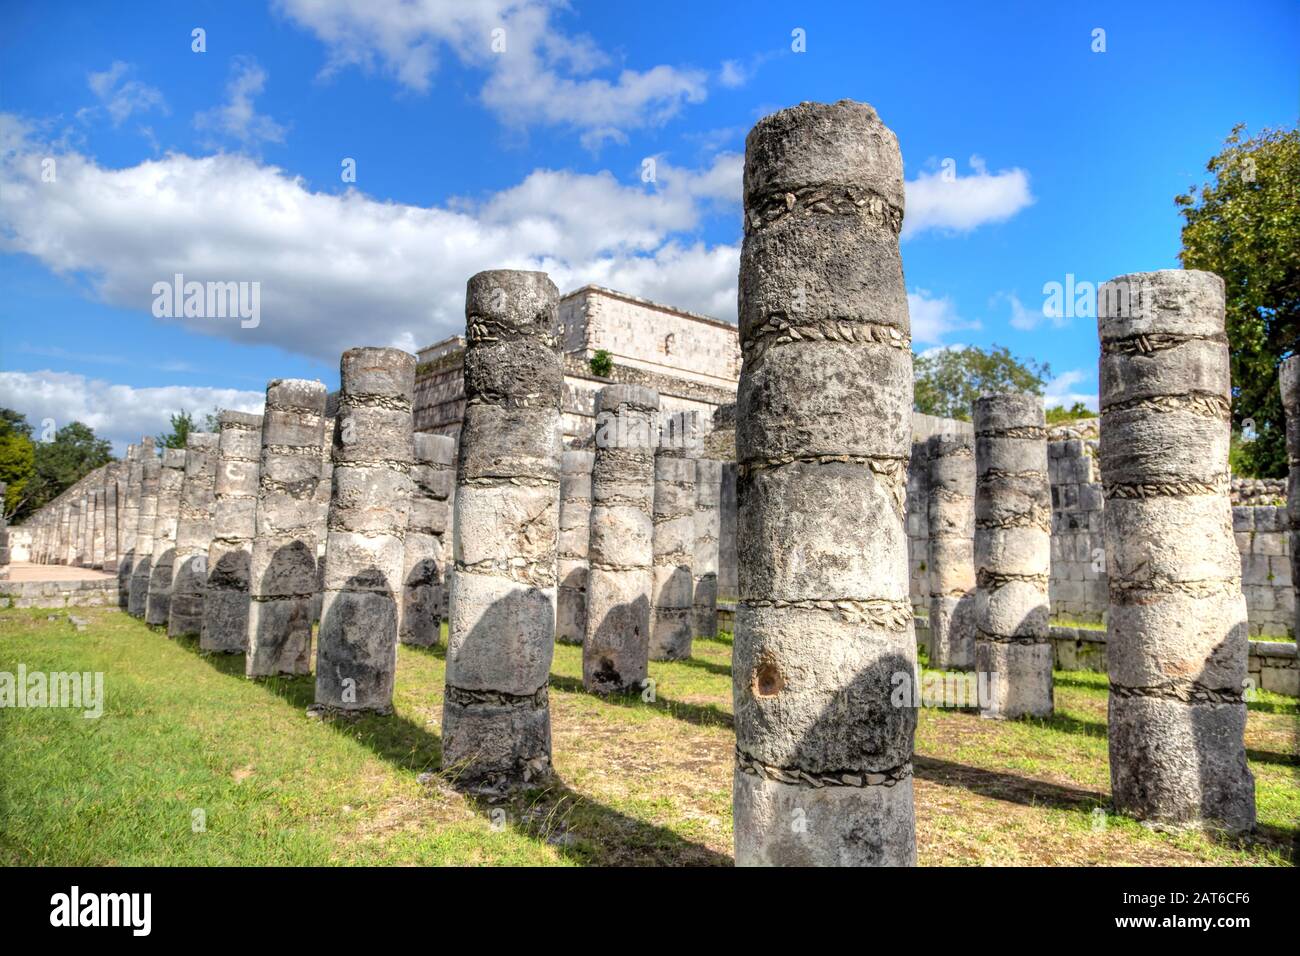 Ancient ruins of Temple of the Warriors at the Mayan archaelogical site of Chichen Itza, Yucatan, Mexico. Its name derives from the pillar columns wit Stock Photo